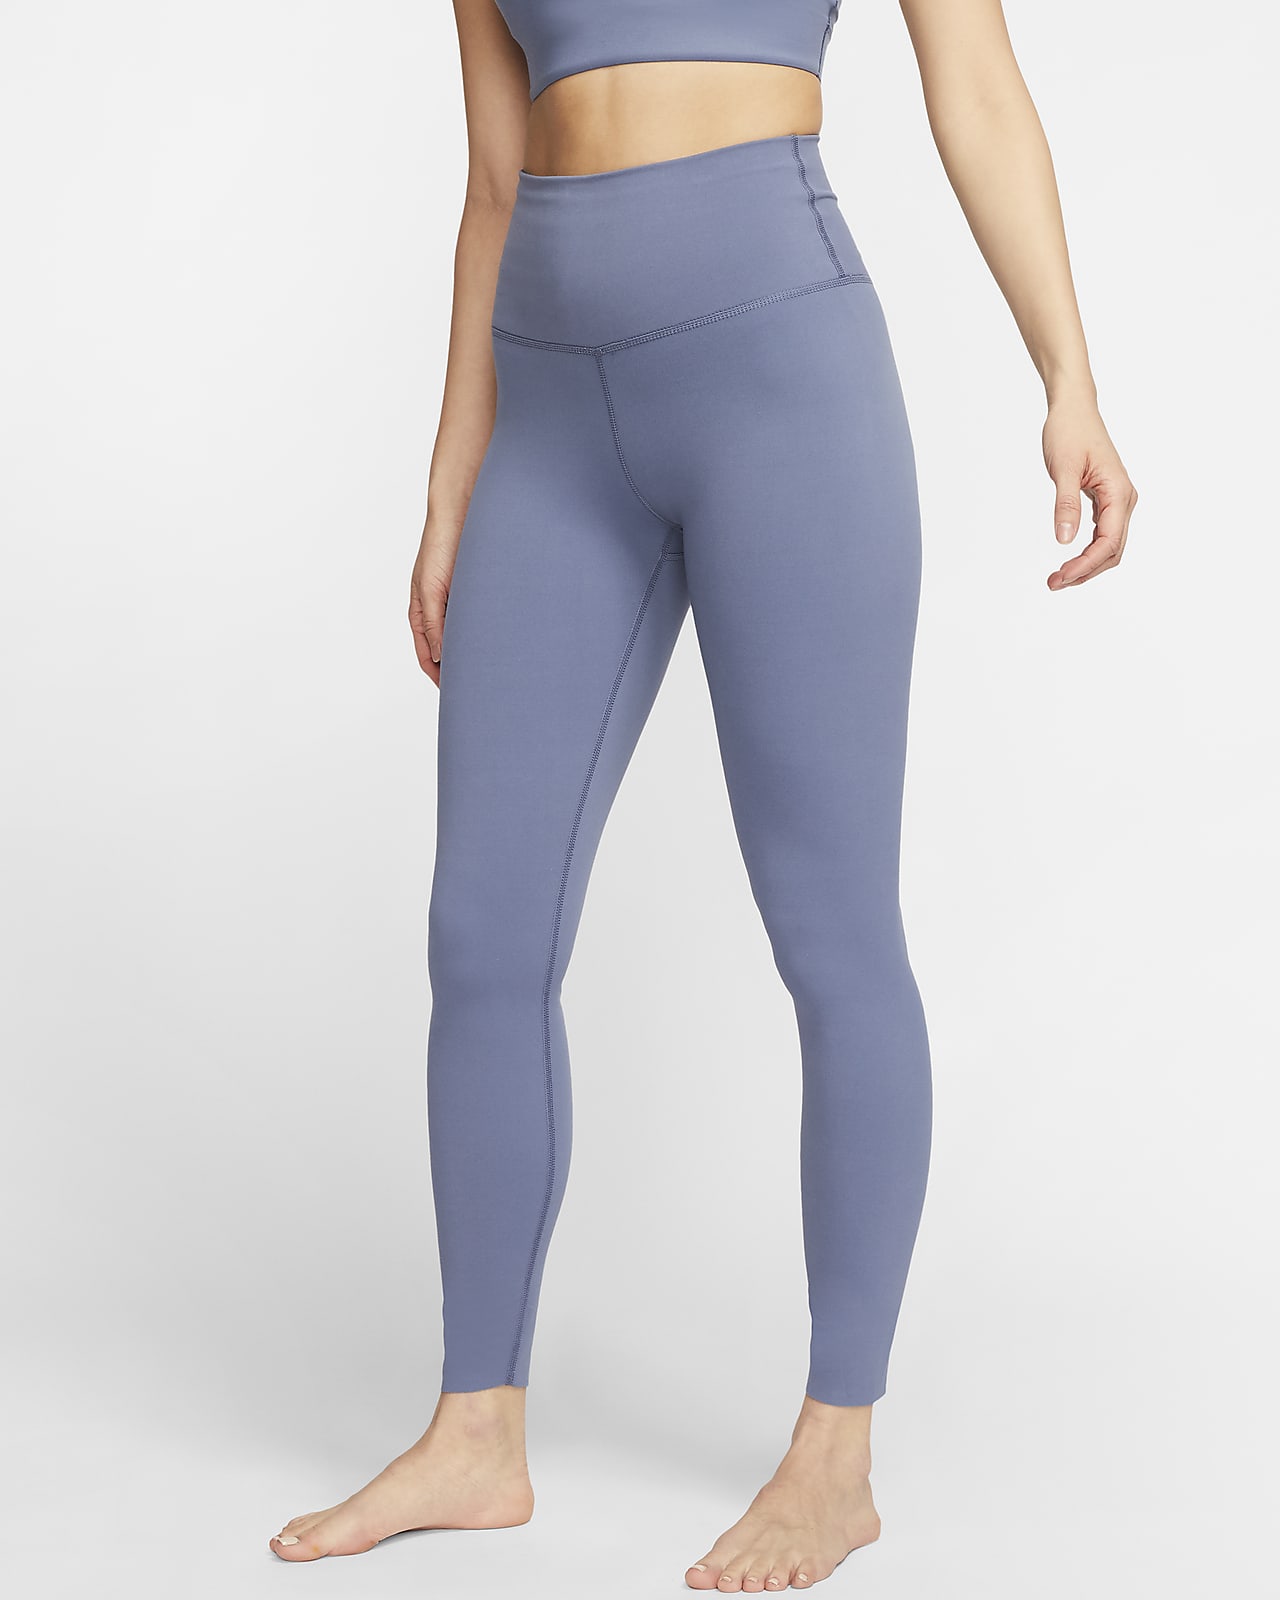 Nike Women's Yoga Luxe High Rise 7/8 Tights, 45% OFF